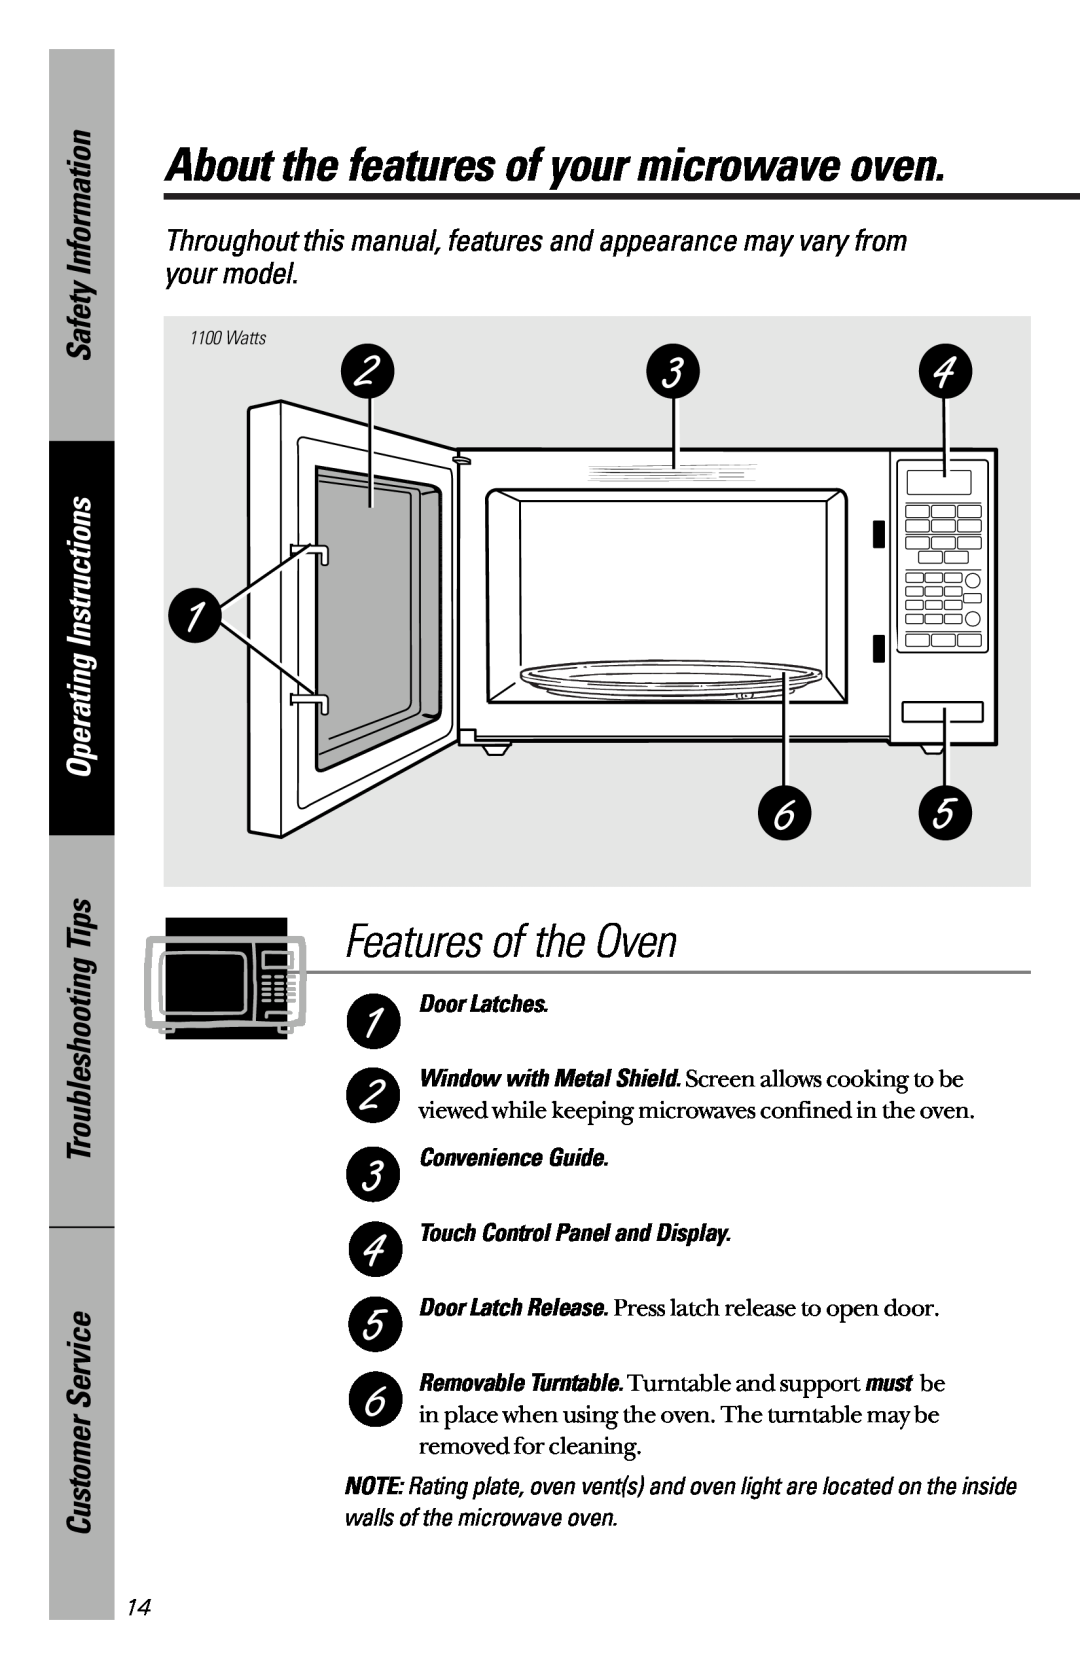 GE JE1340WC Features of the Oven, Safety Information, Operating Instructions, About the features of your microwave oven 